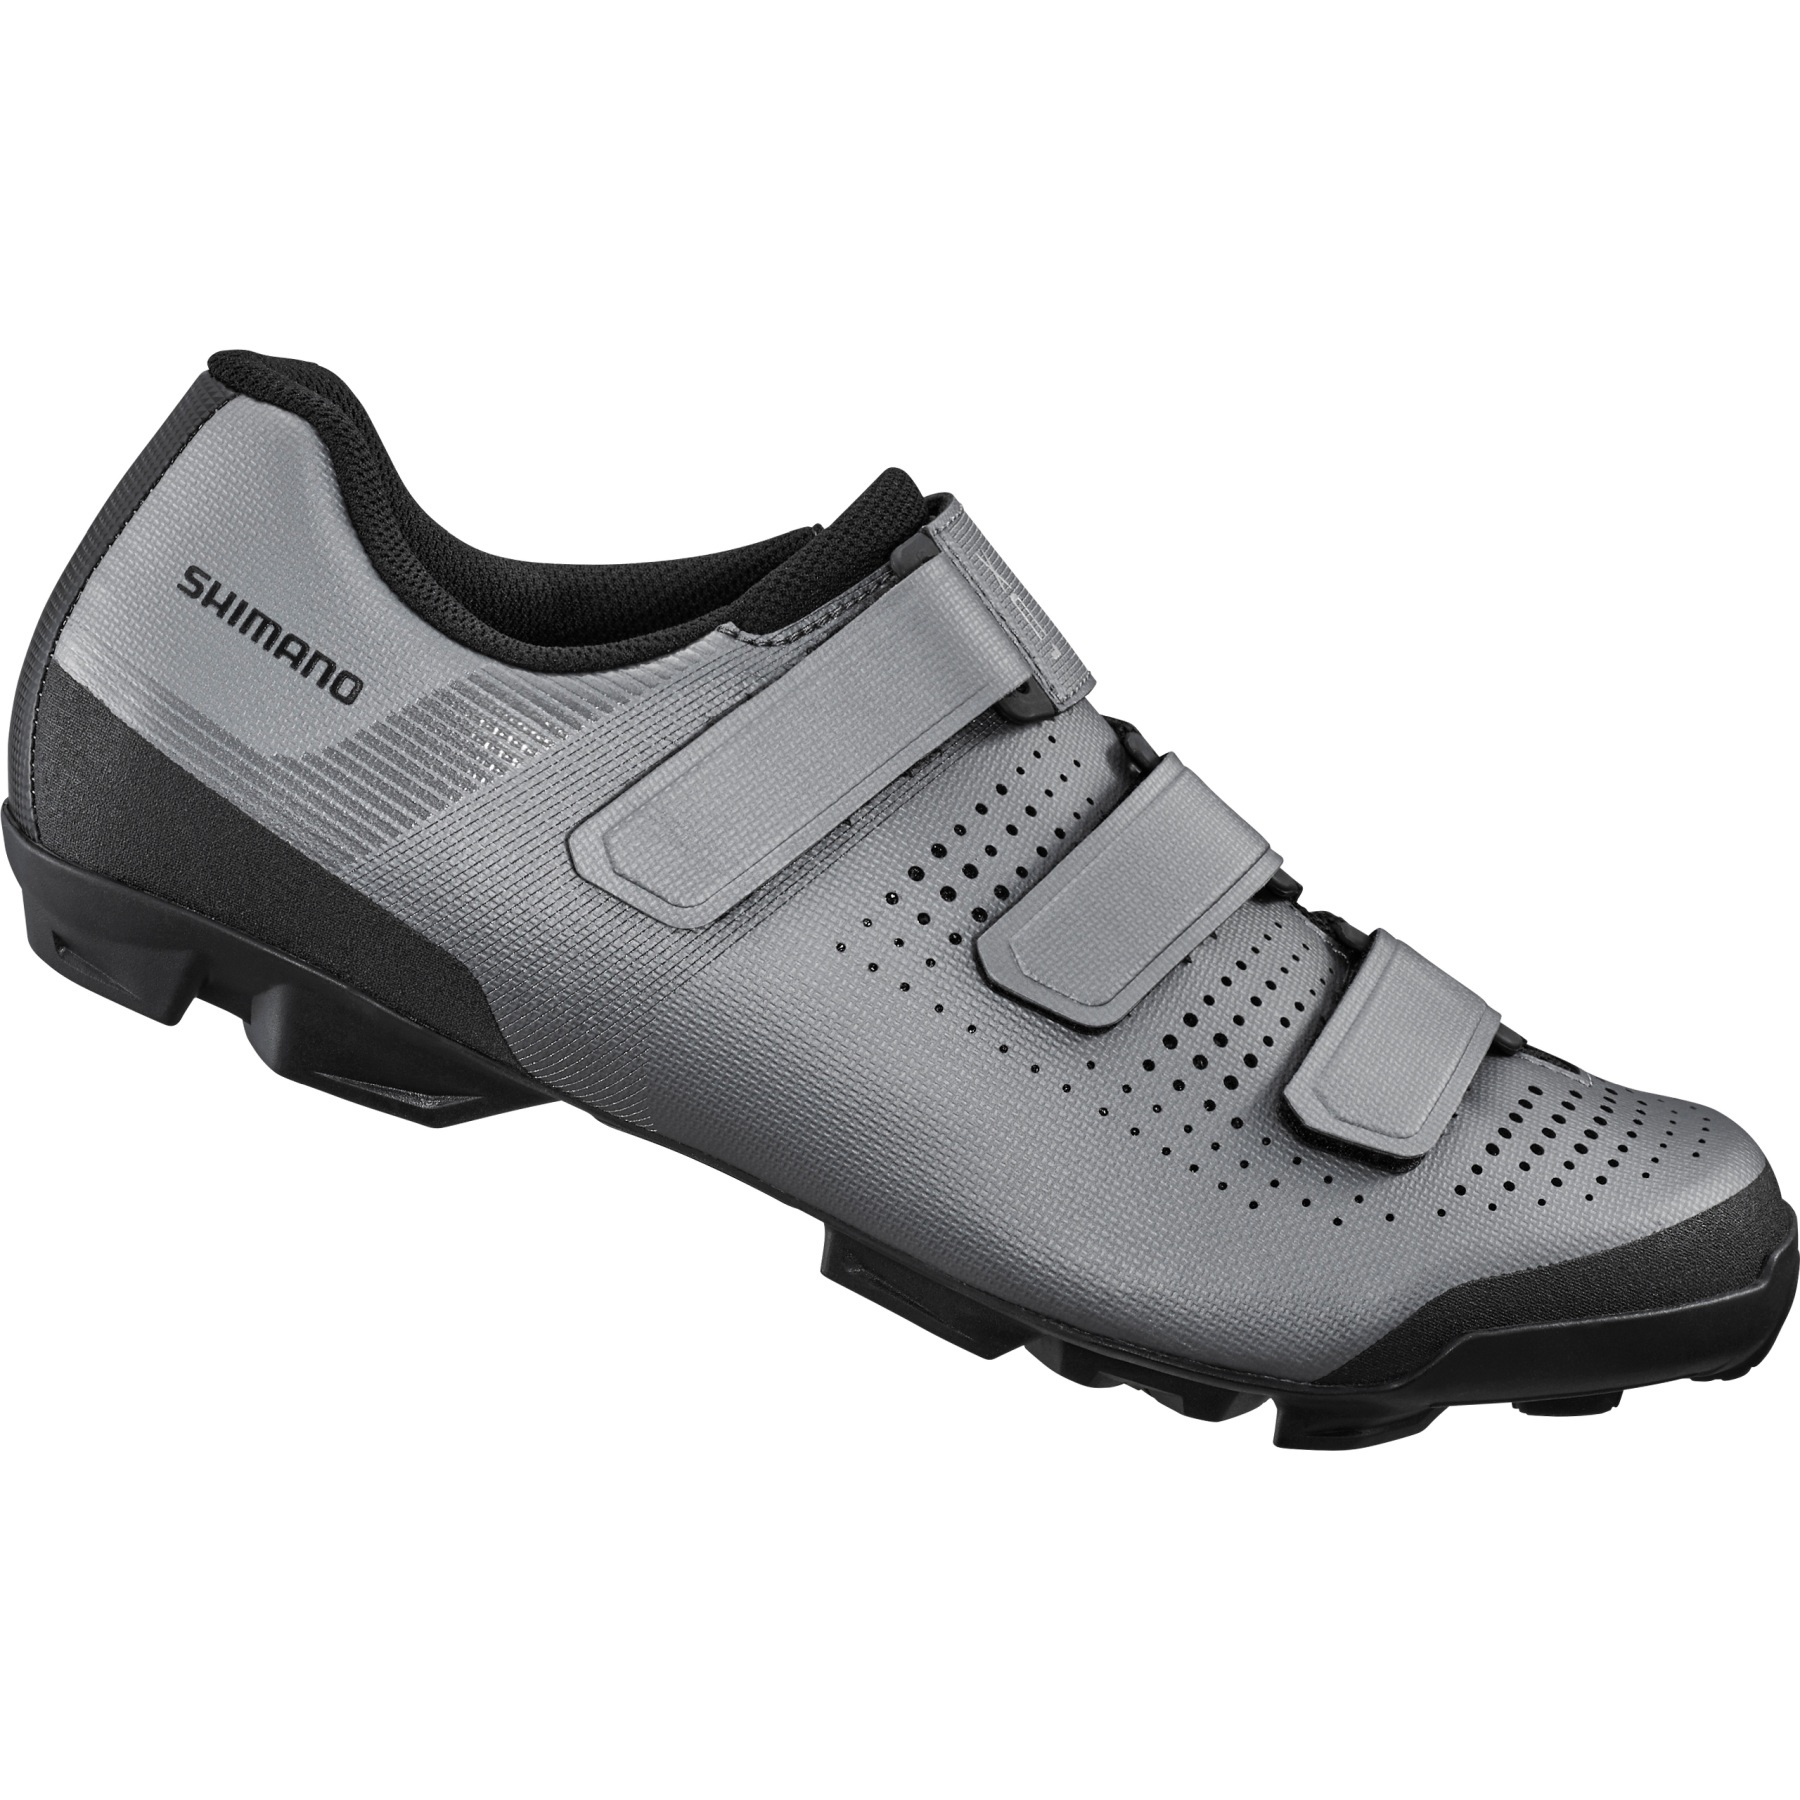 Mountain Bike Shoes, Buy Online from Westbrook